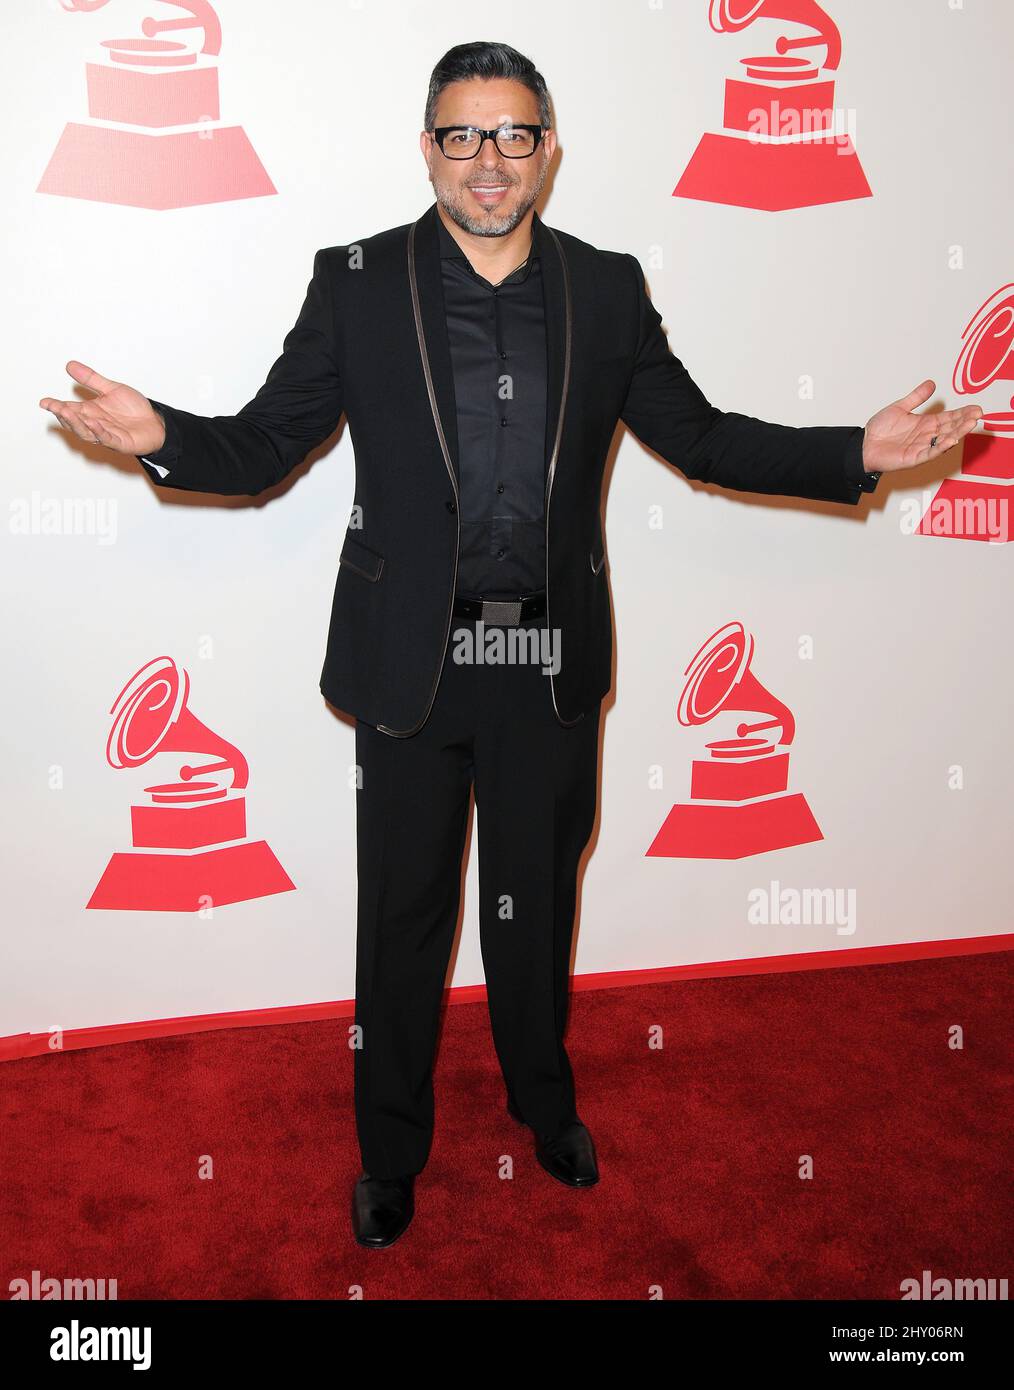 Luis Enrique nimmt an der Latin Recording Academy Person of the Year Tribute to Caetano Veloso 2012 in der MGM Grand Garden Arena in Las Vegas, USA, Teil. Stockfoto